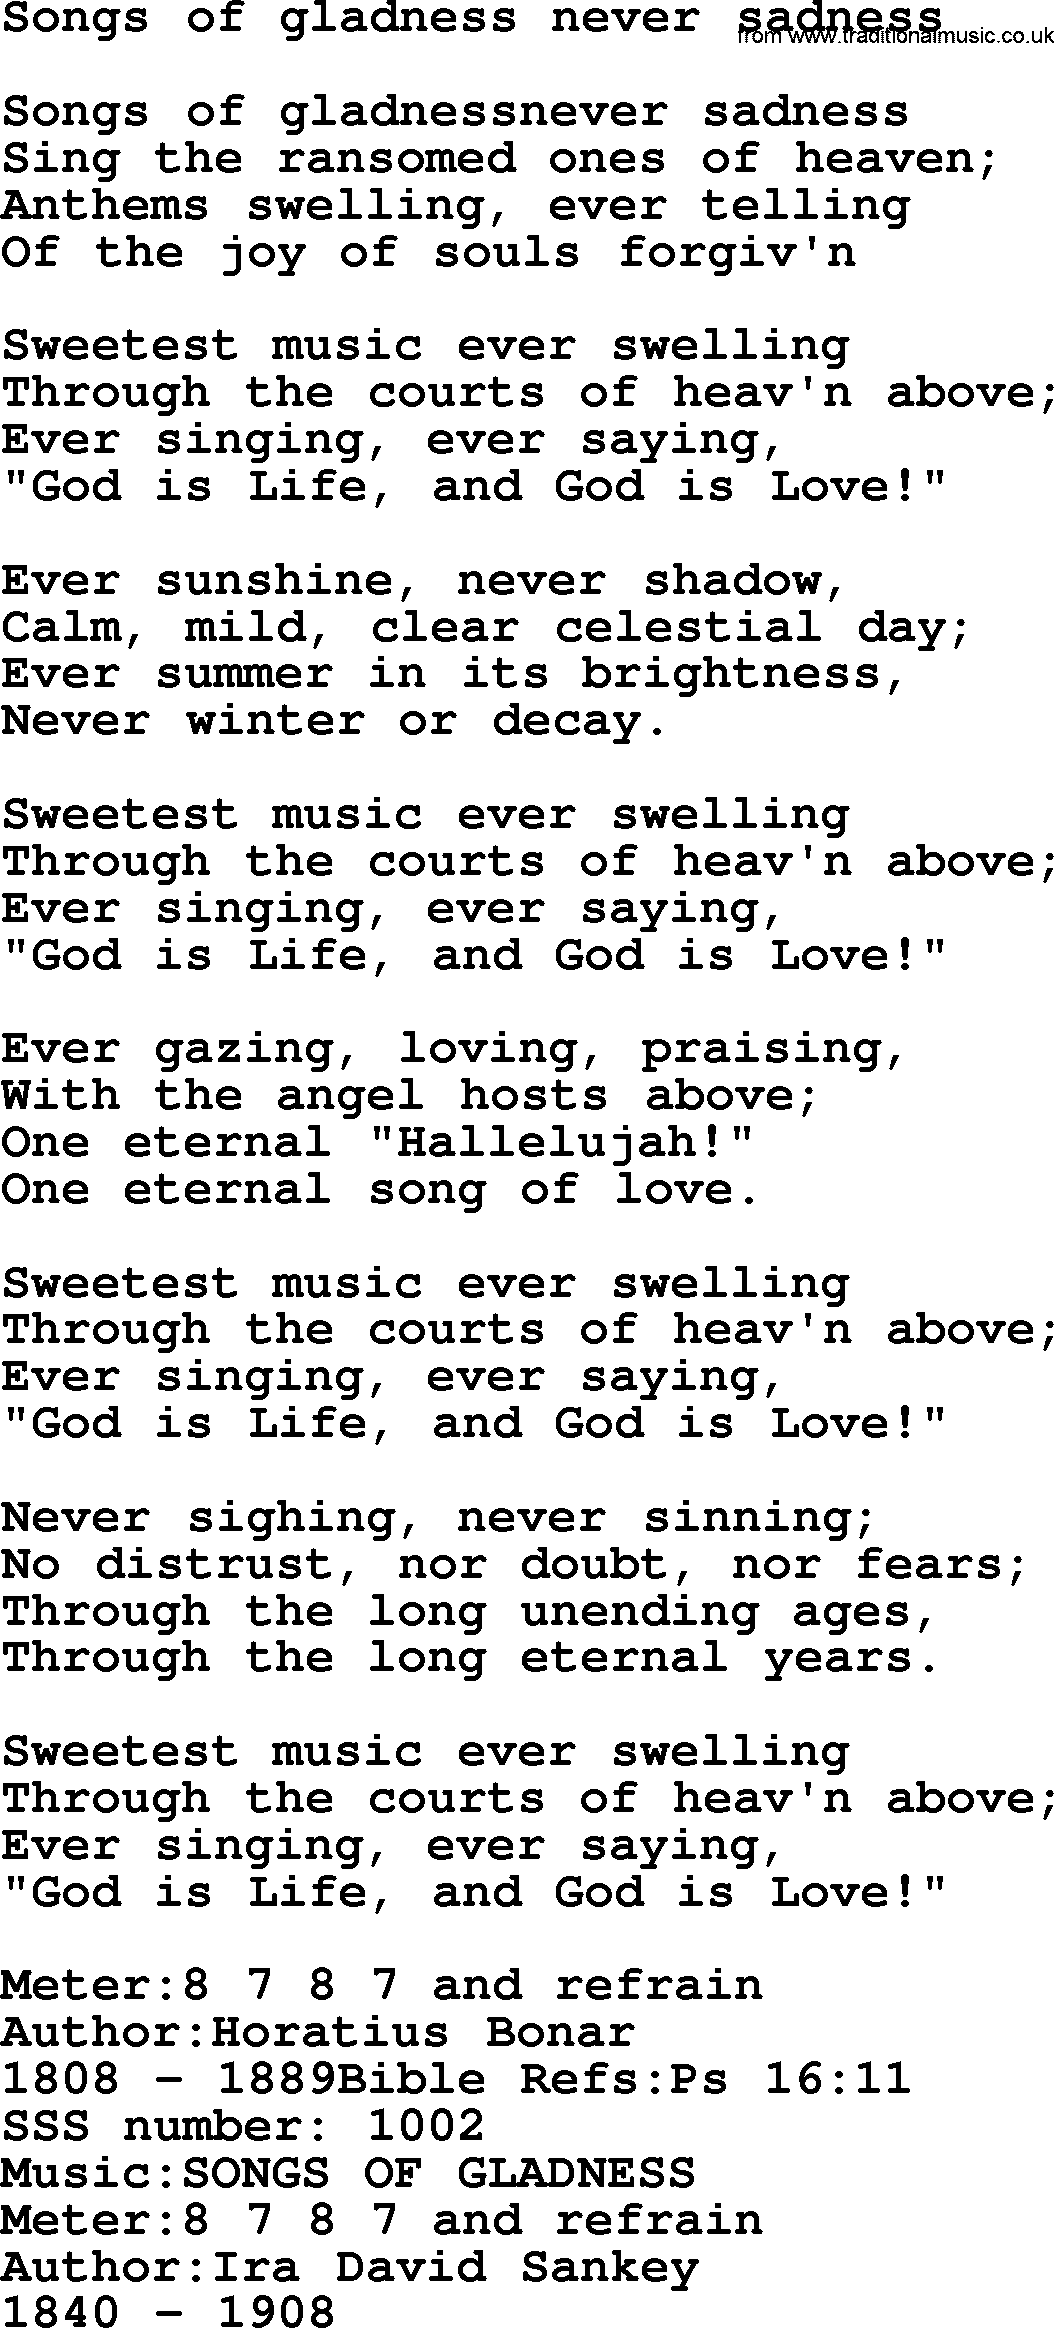 Sacred Songs and Solos complete, 1200 Hymns, title: Songs Of Gladness Never Sadness, lyrics and PDF